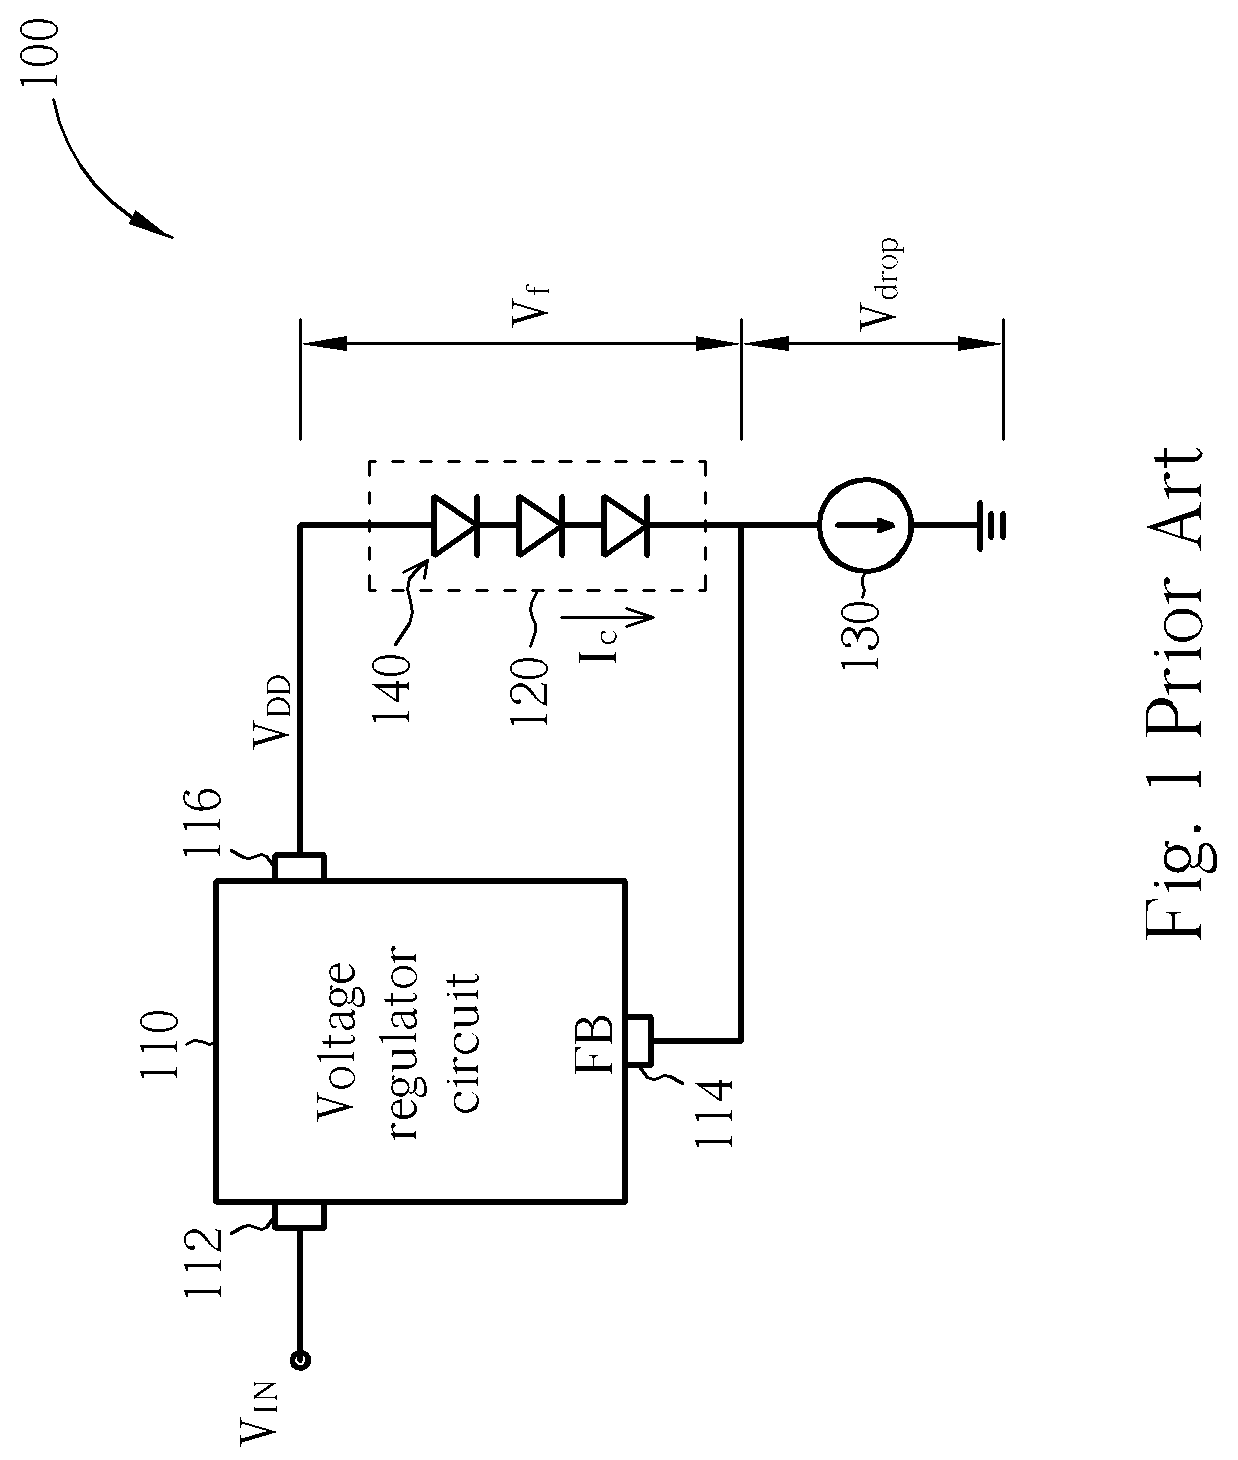 Driving circuit and related driving method for providing feedback control and open-circuit protection